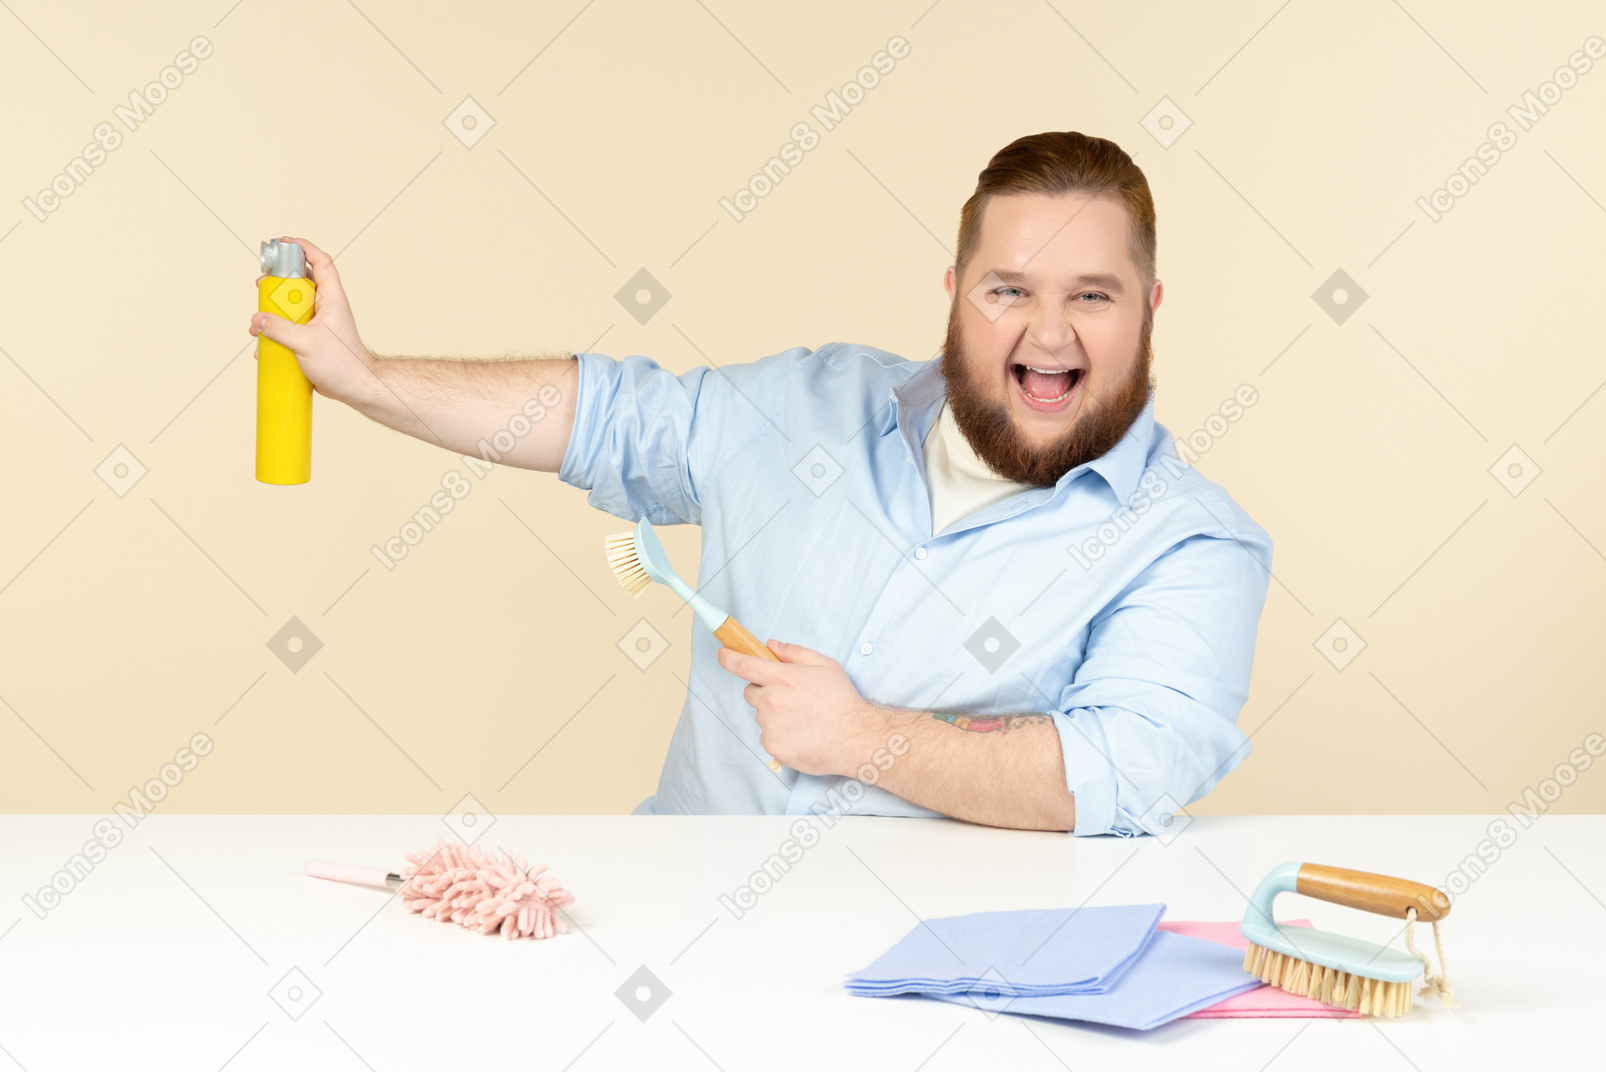 Young overweight man sitting at the table in the profile and holding cleaning equipment